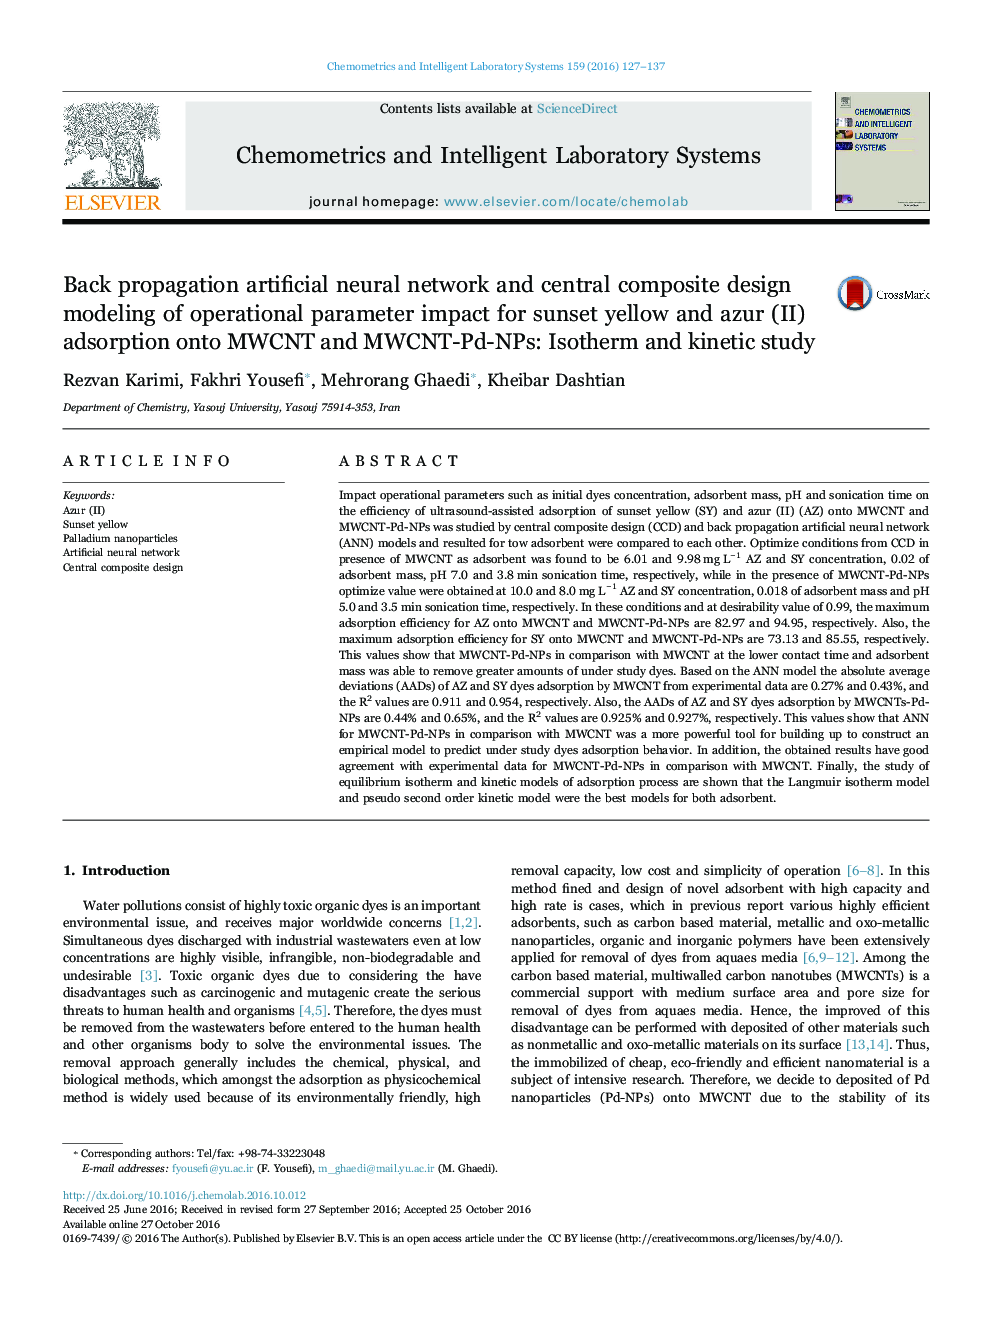 Back propagation artificial neural network and central composite design modeling of operational parameter impact for sunset yellow and azur (II) adsorption onto MWCNT and MWCNT-Pd-NPs: Isotherm and kinetic study